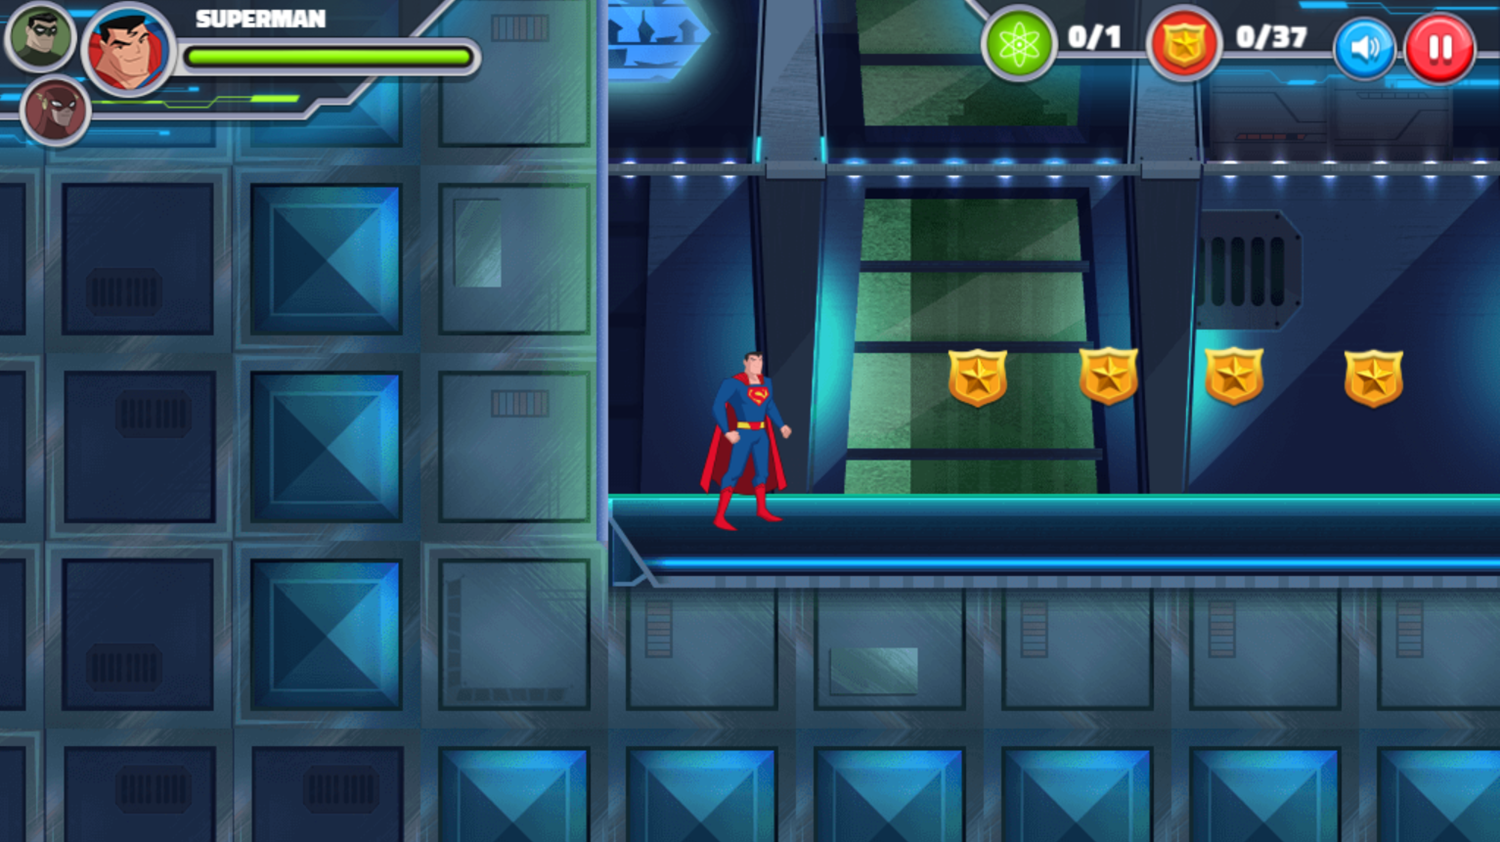 Justice League Action Nuclear Rescue Game Start Screenshot.